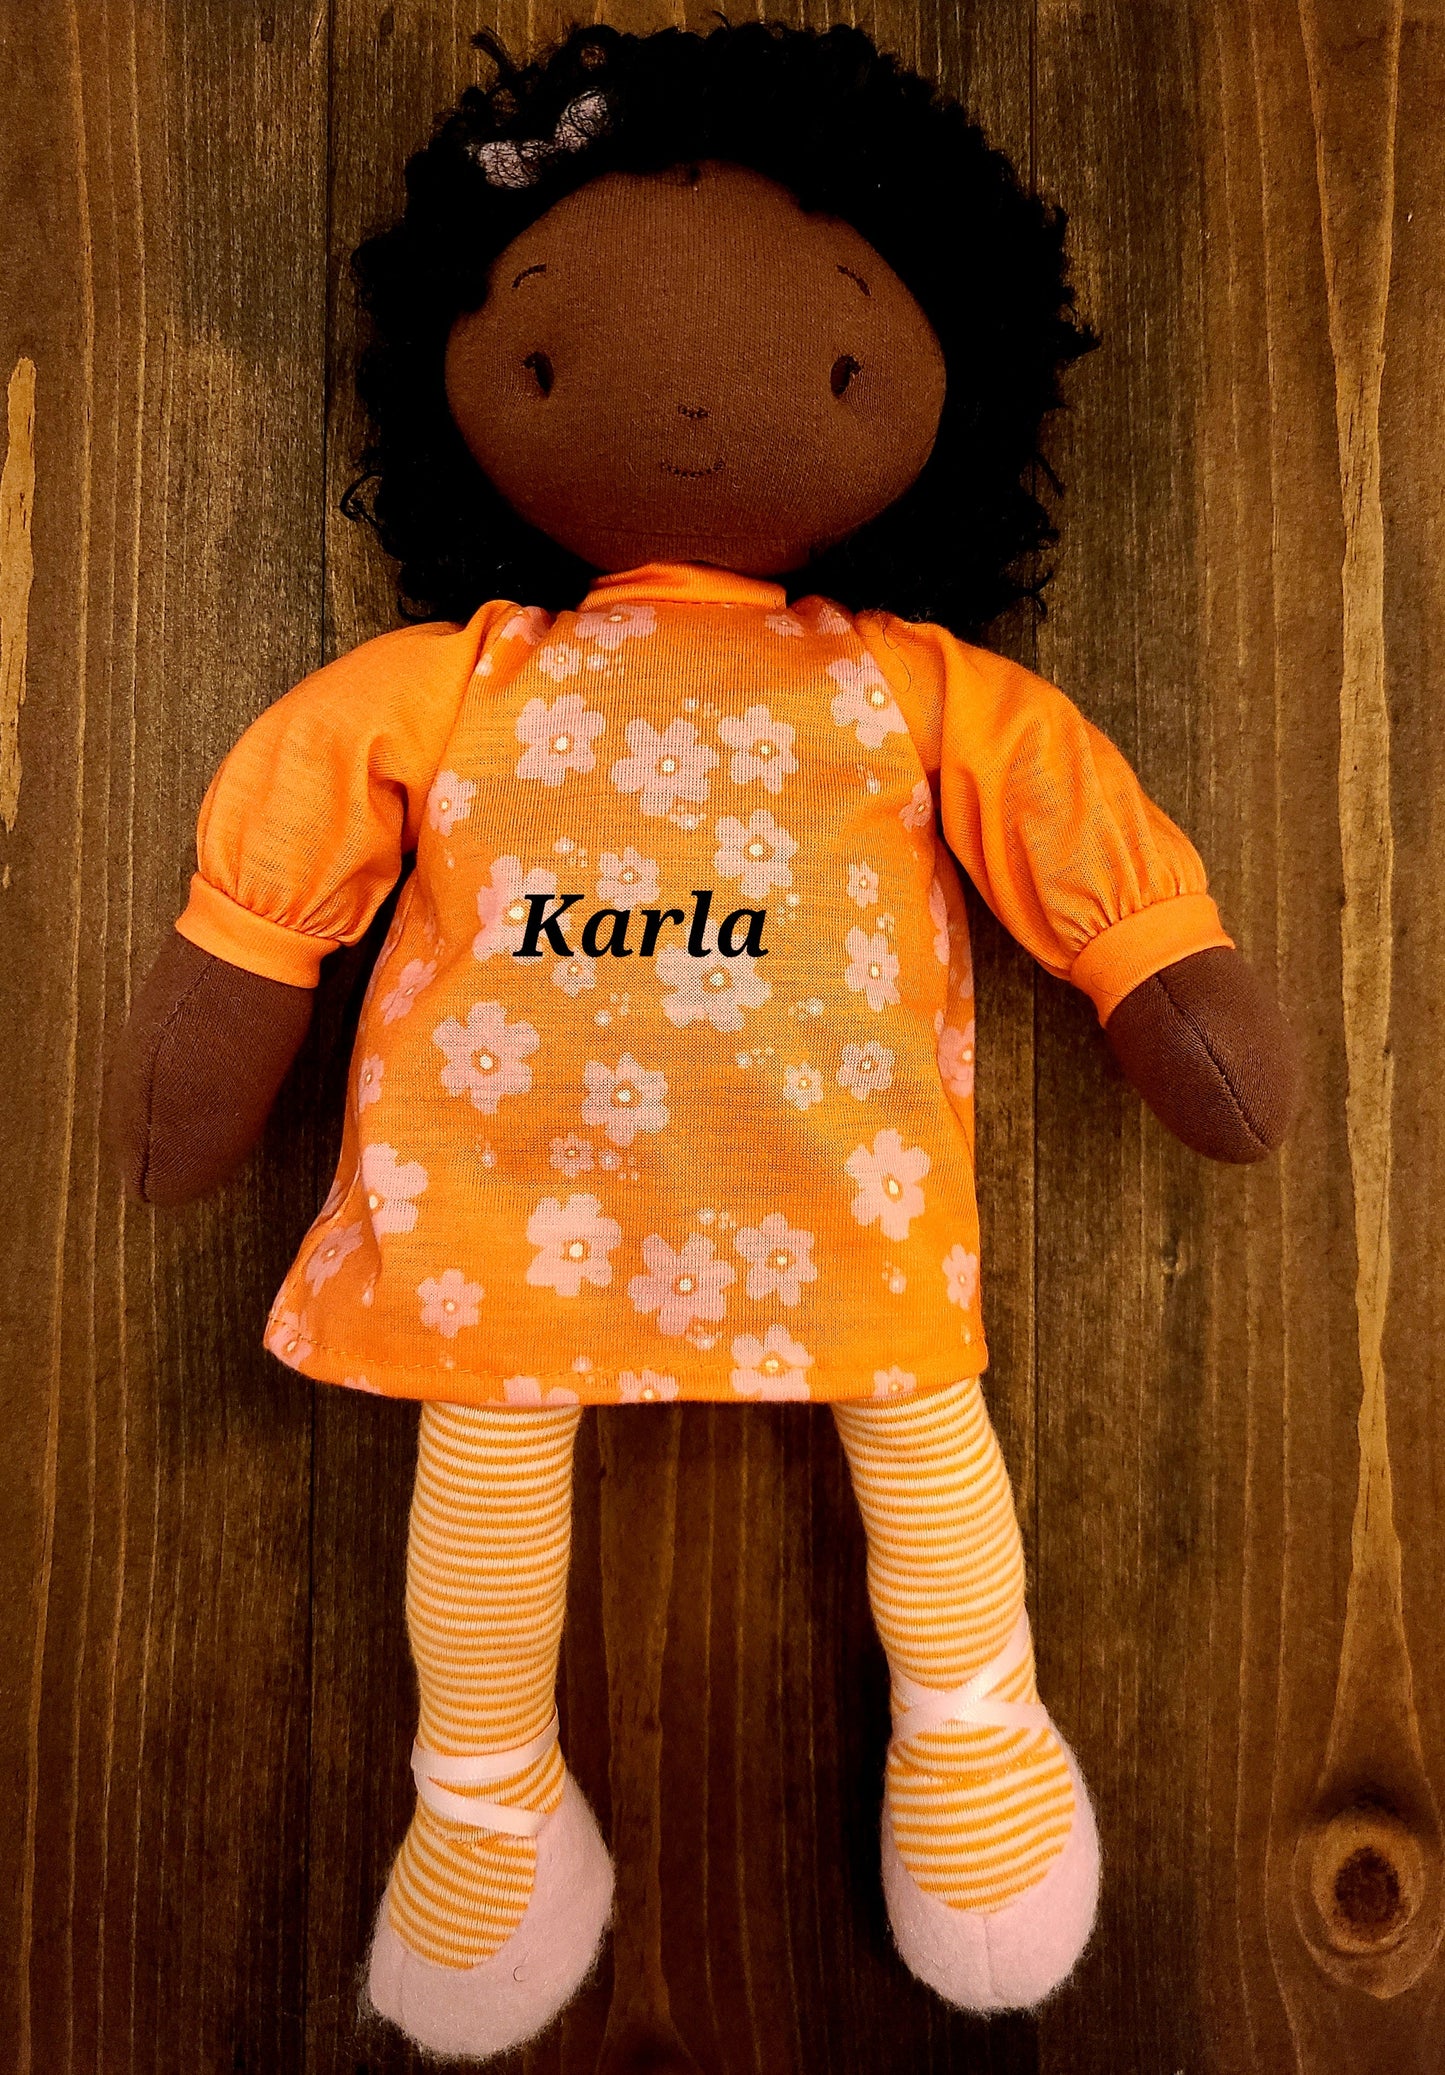 Personalized Soft Rag 12"  Orange Floral  Dress Brown Girl Plush Doll Toy/Handmade Baby Gift Toy/ Global Sister